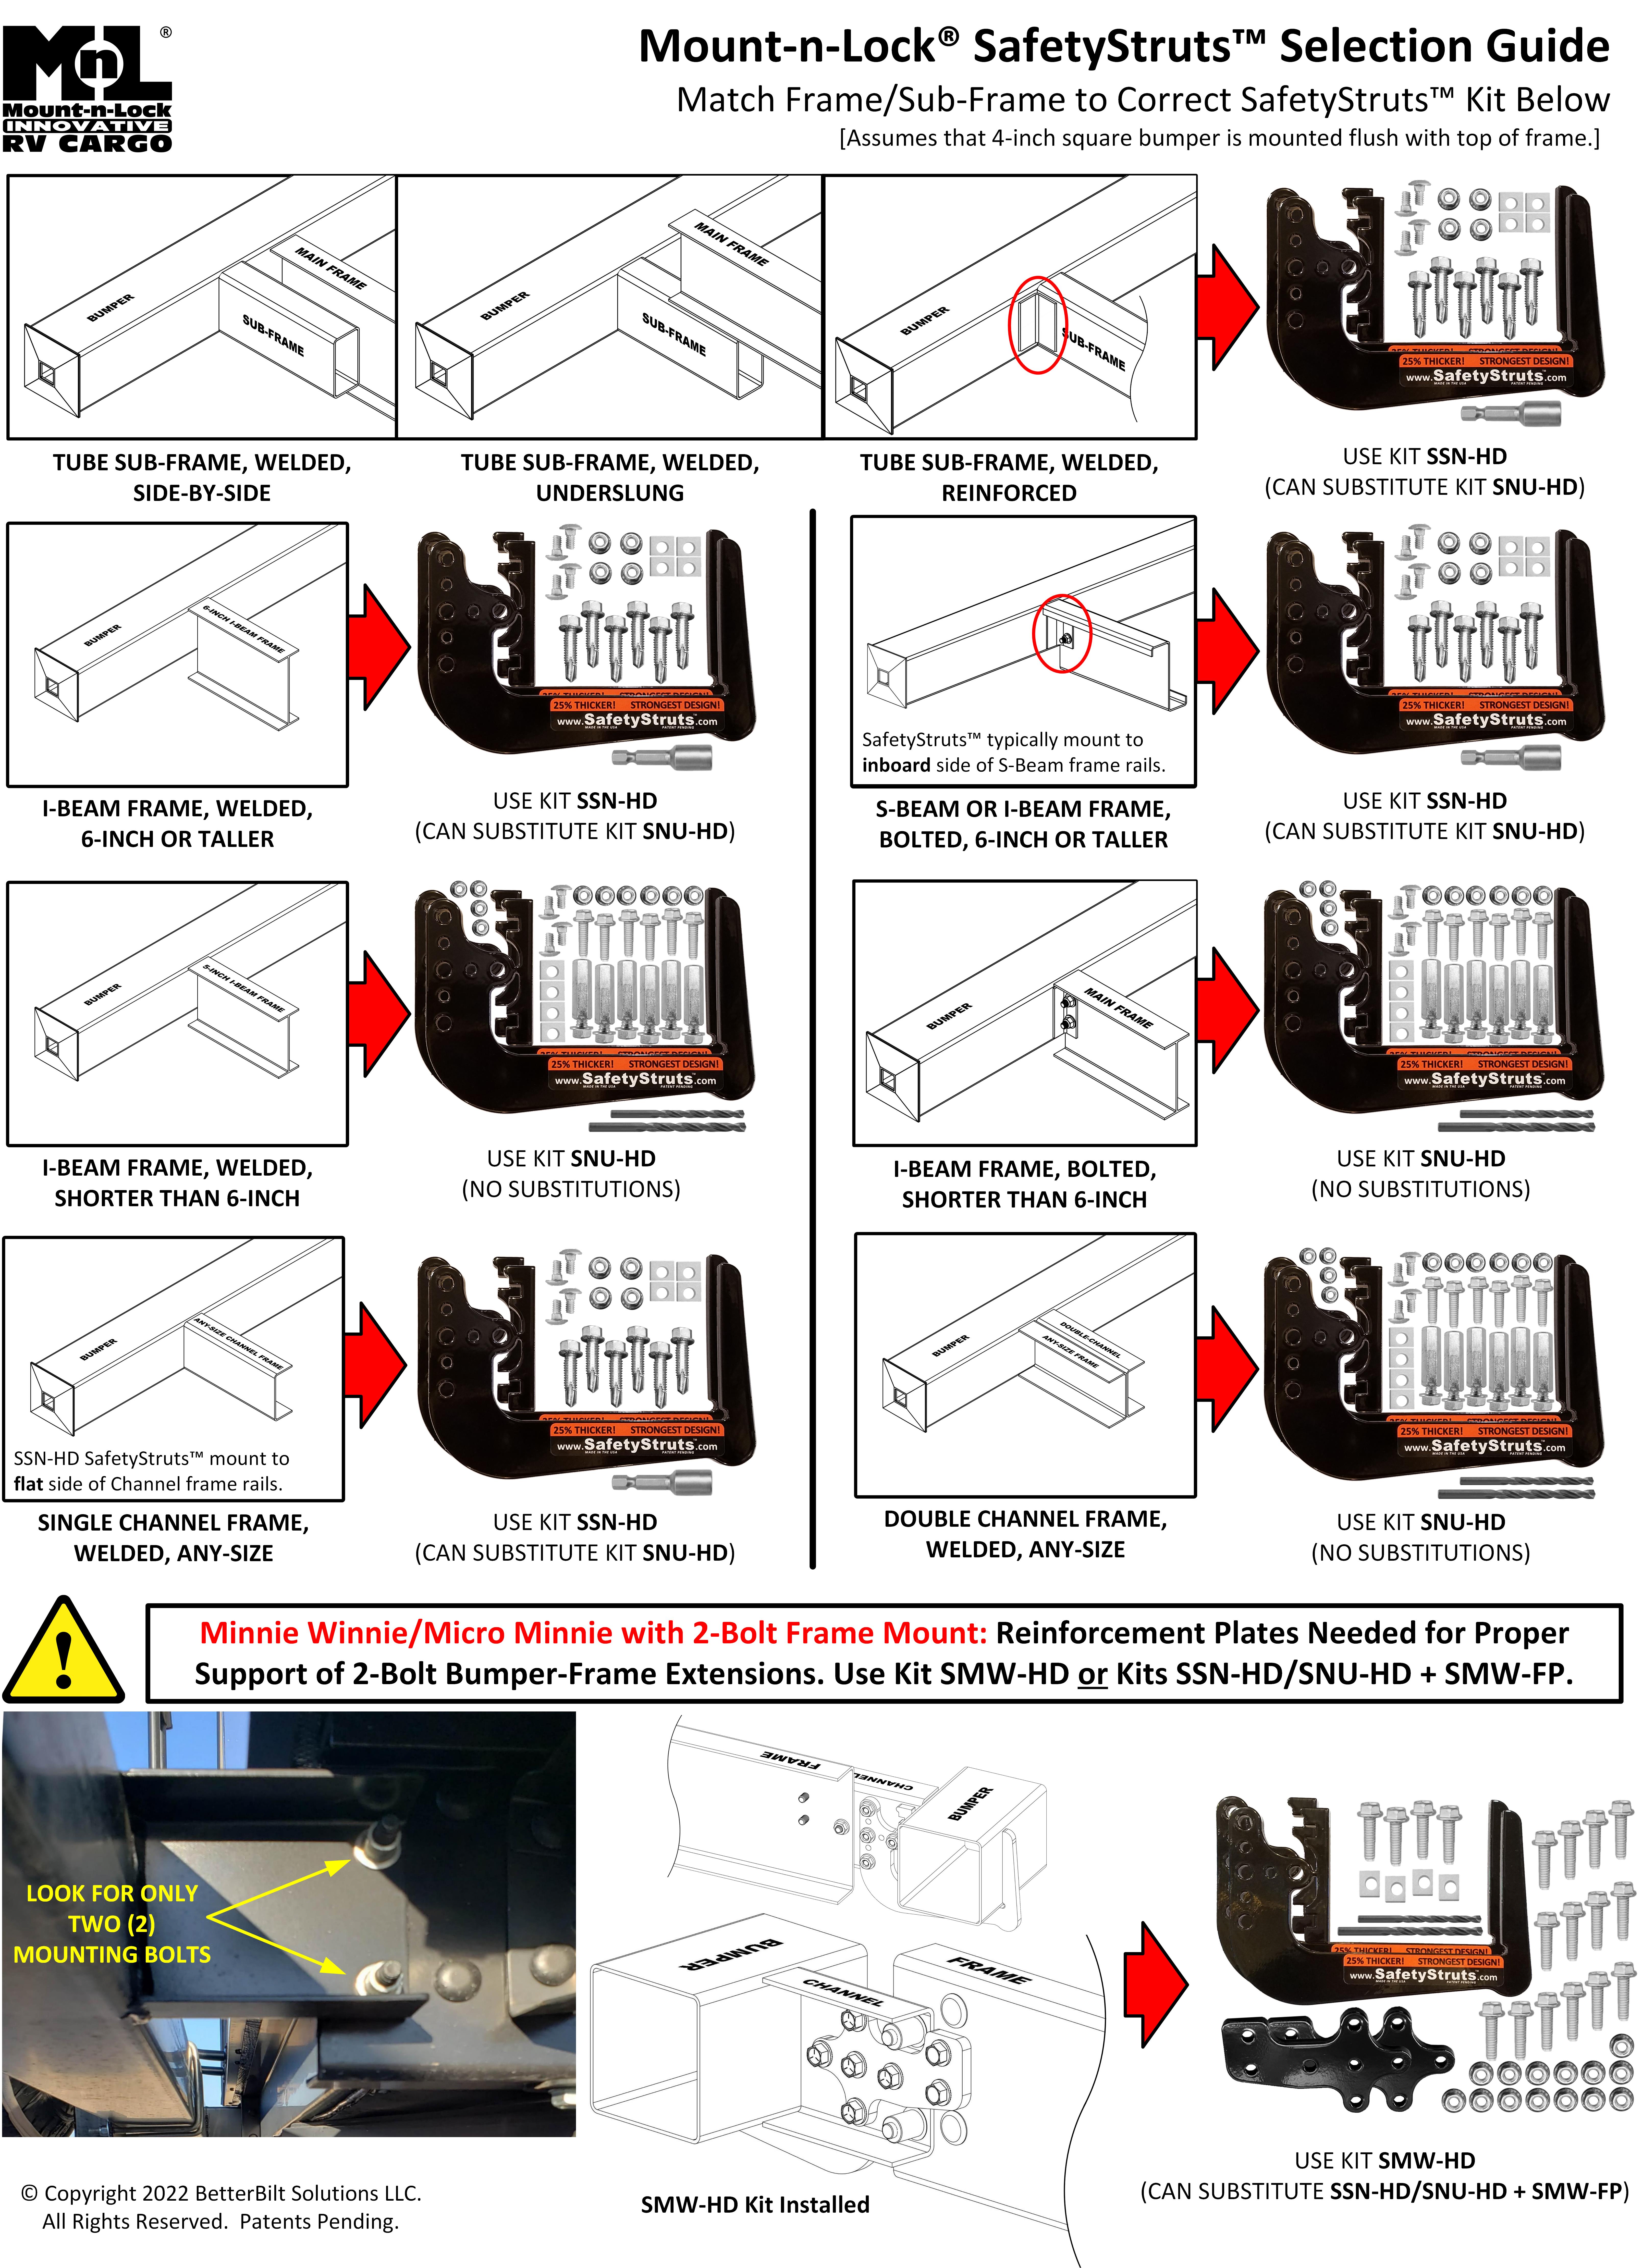 4SQUARE SafetyStruts Selection Guide